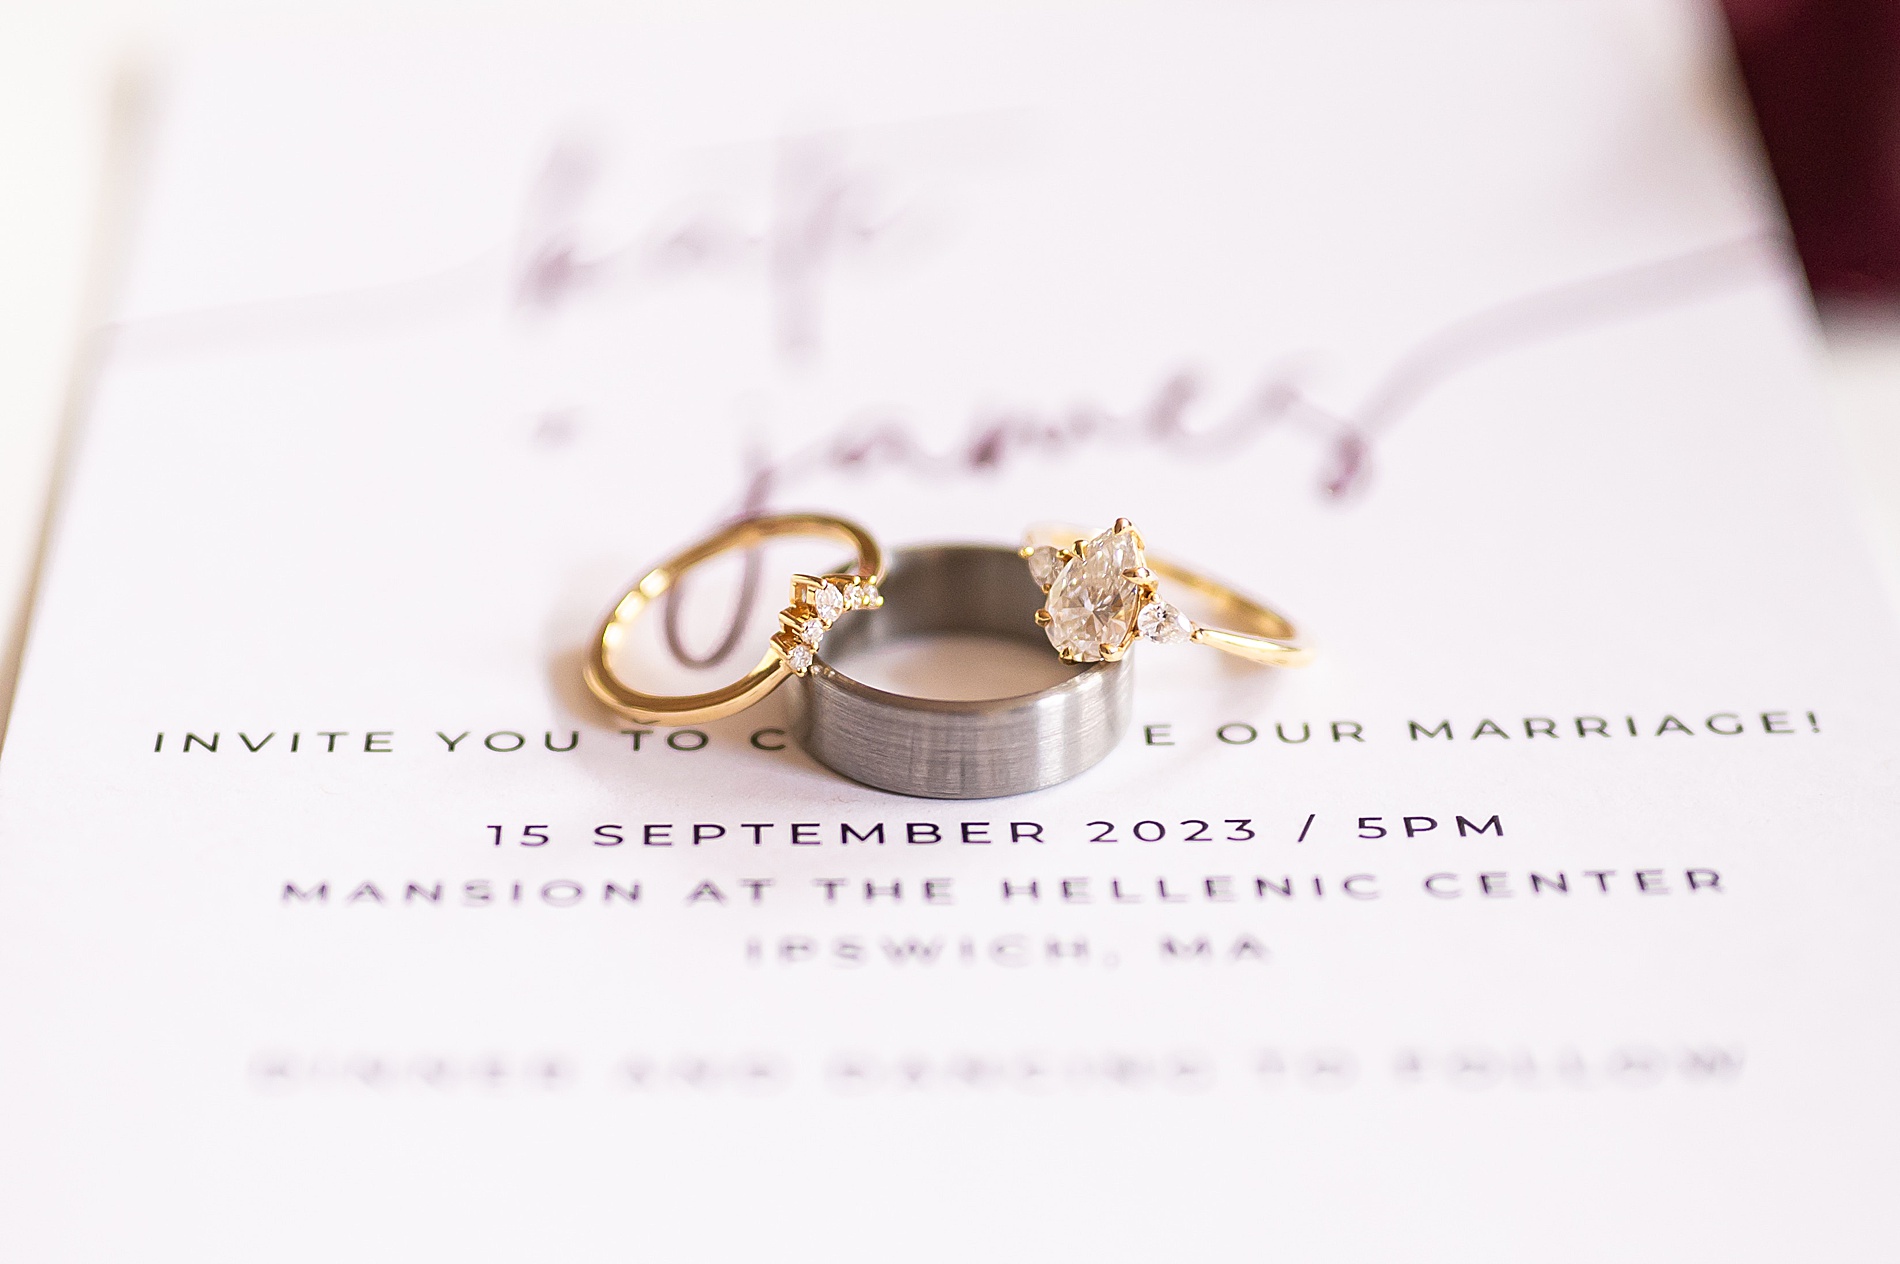 wedding invites with wedding rings on top